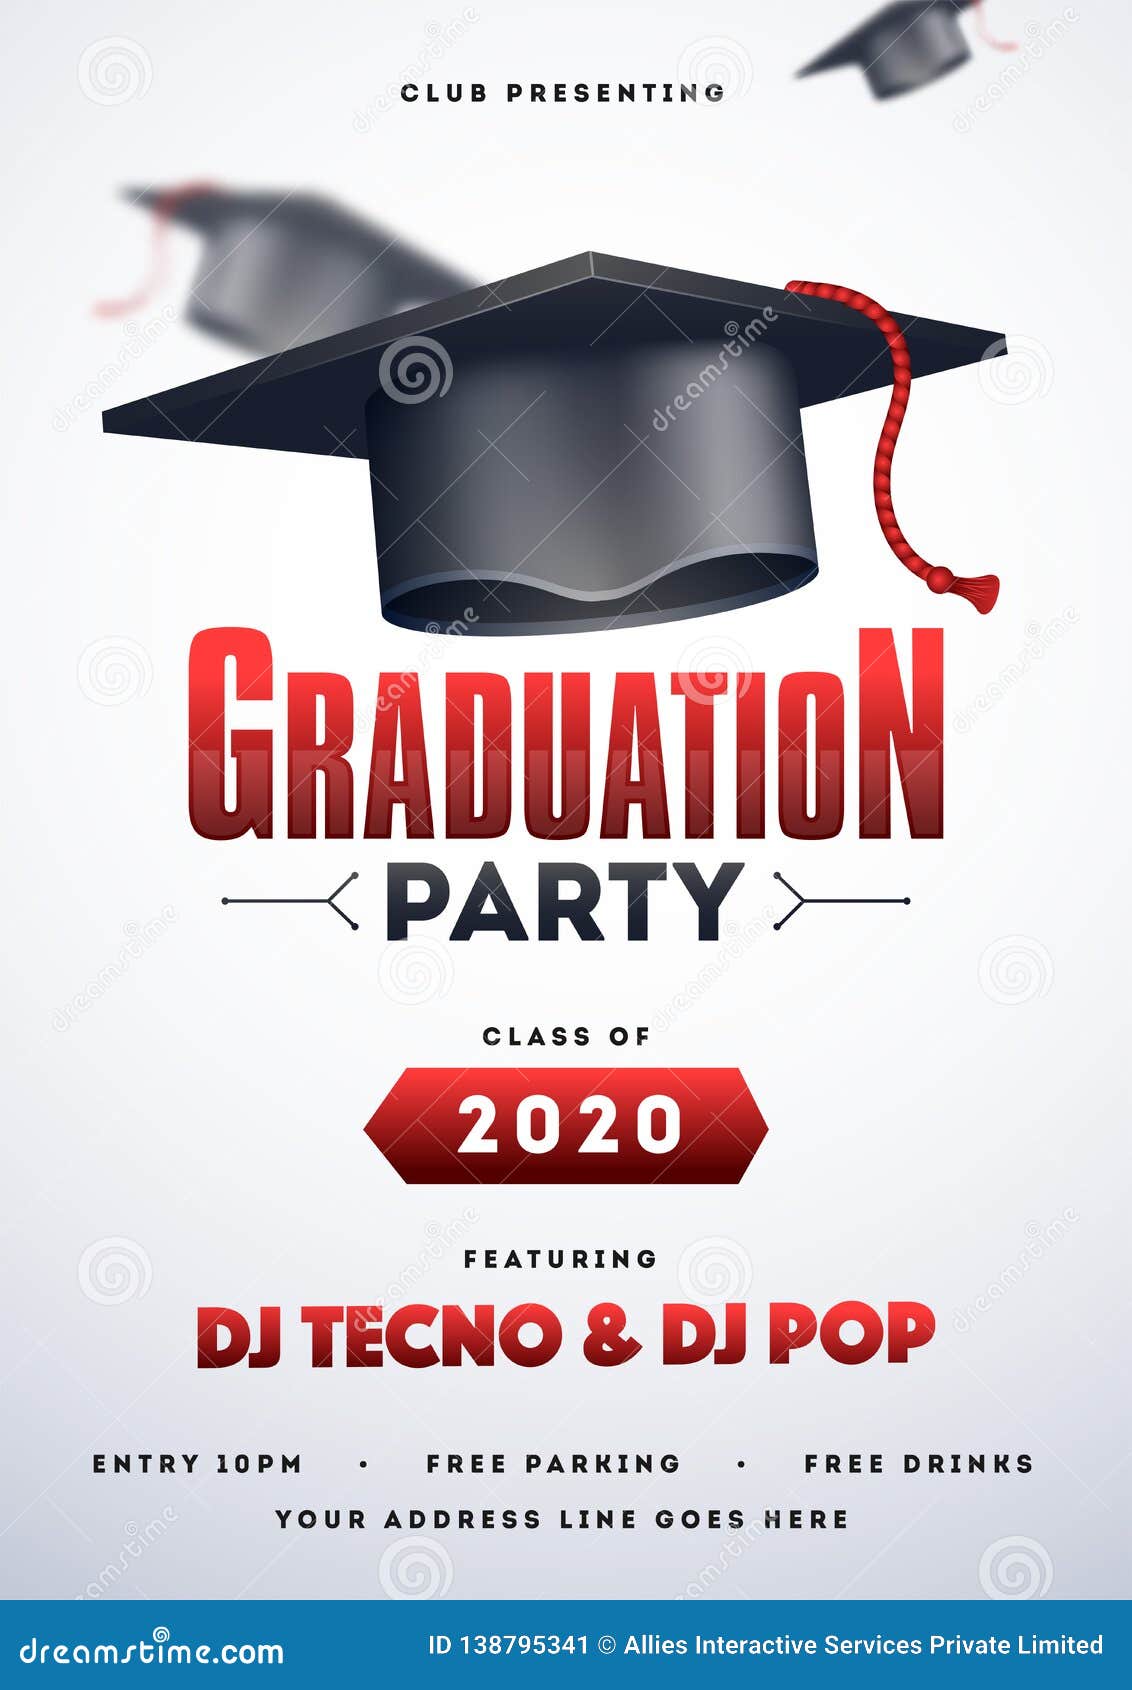 Graduation Party Flyer Template Free from thumbs.dreamstime.com